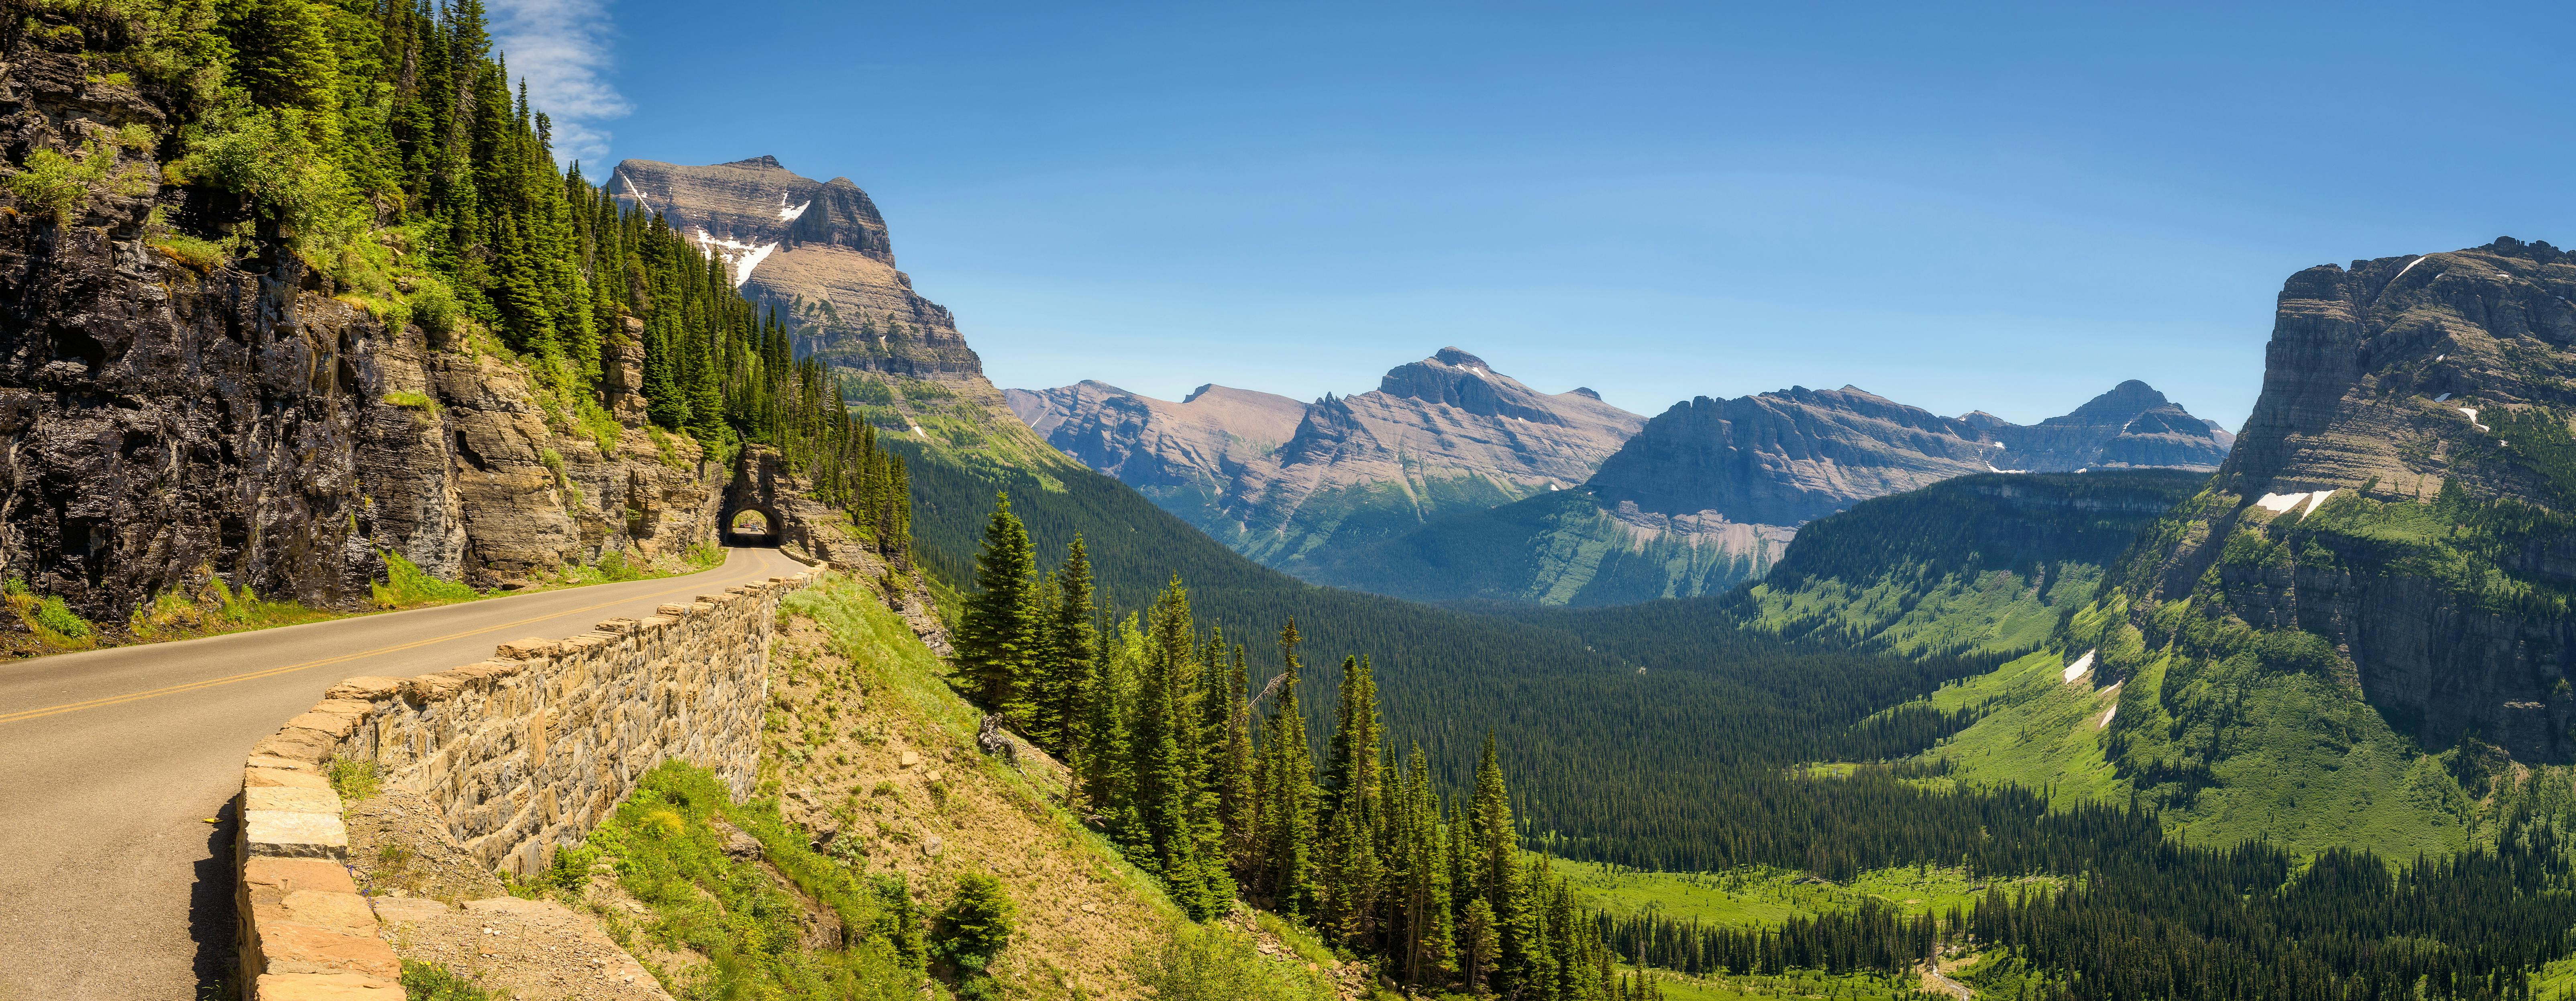 Riding to Sun Road with a panoramic view of Glacier National Park Montana